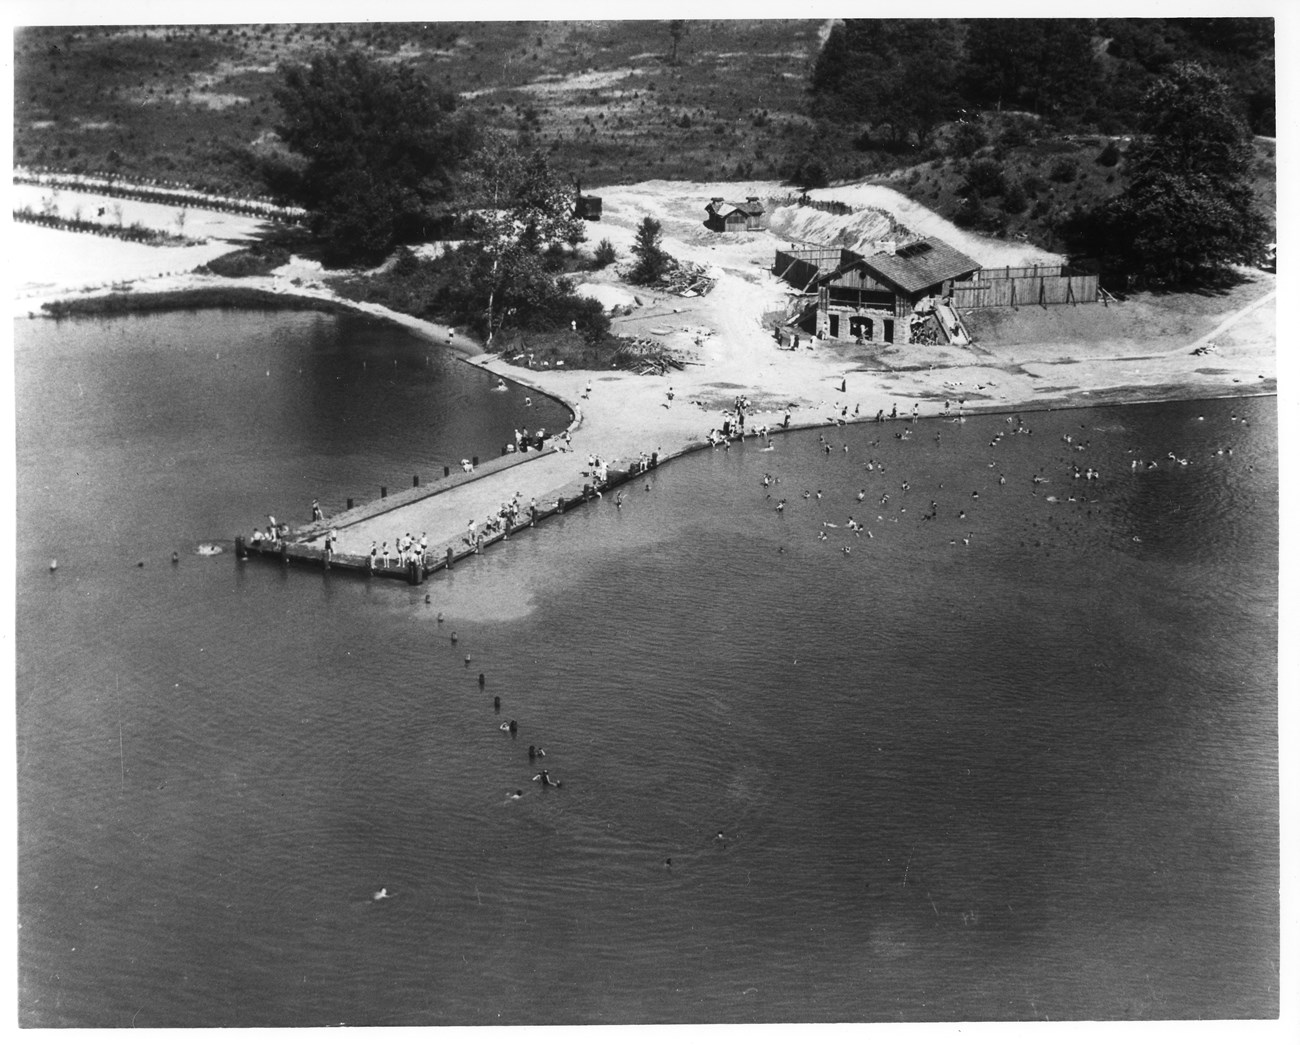 A black-and-white aerial photo of Kendall Lake: a large fishing pier, sandy beach and stone bath house.